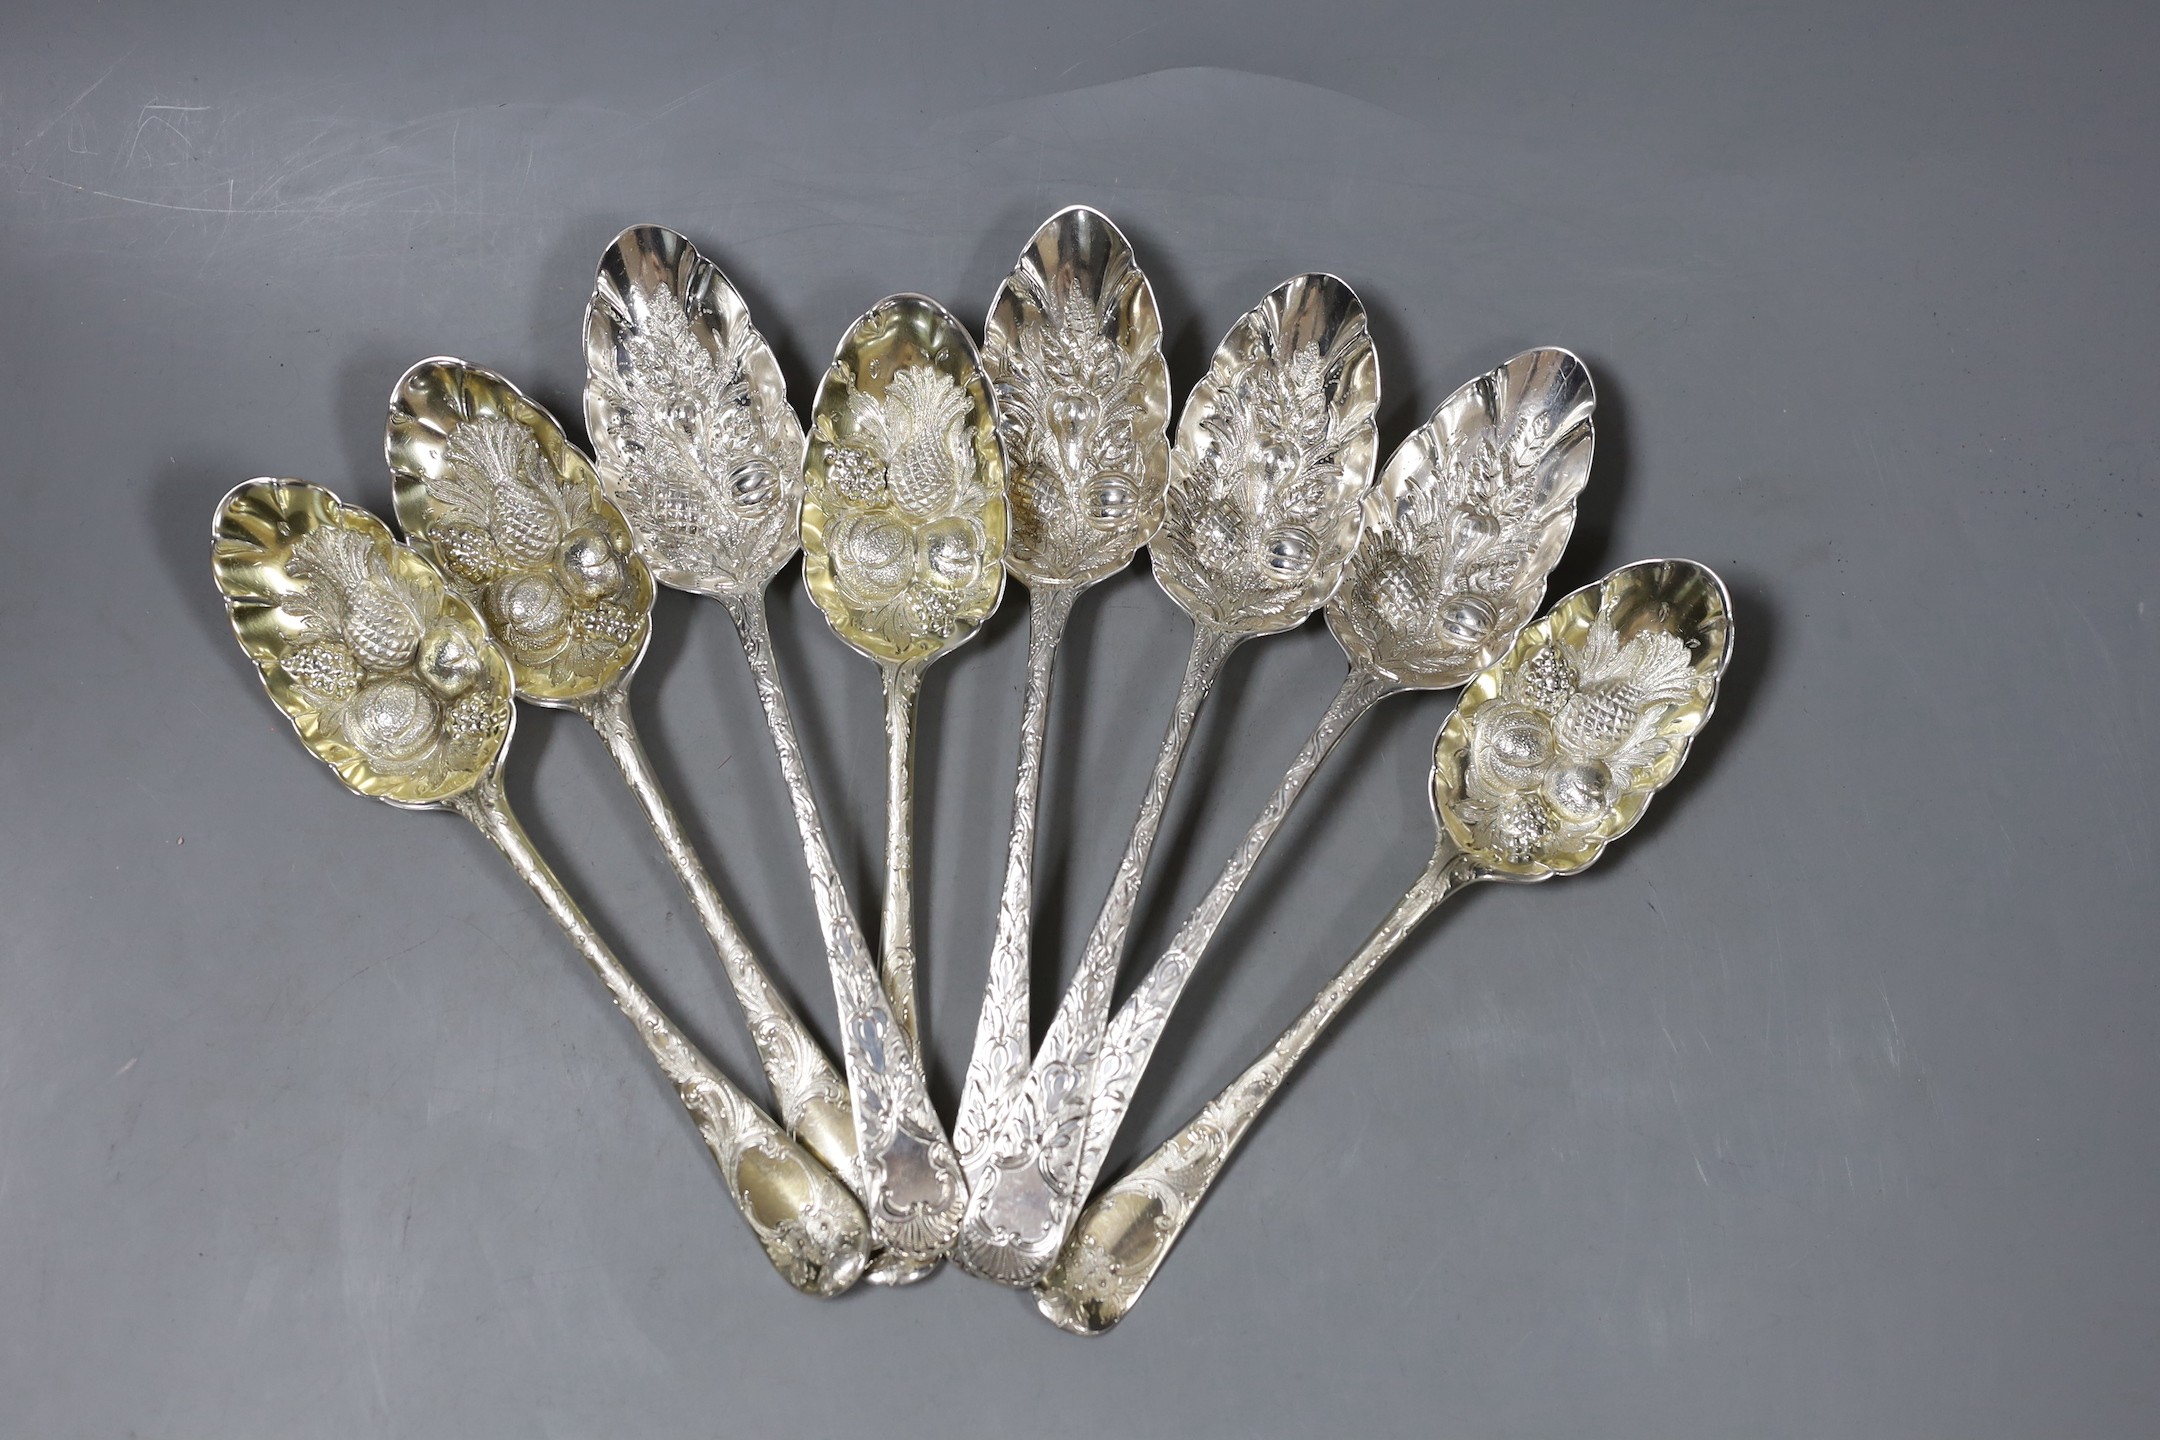 A set of four George III silver 'berry' spoons, by Eley & Fearn, London, 1805 and four earlier silver 'berry' spoons, marks pinched                                                                                         